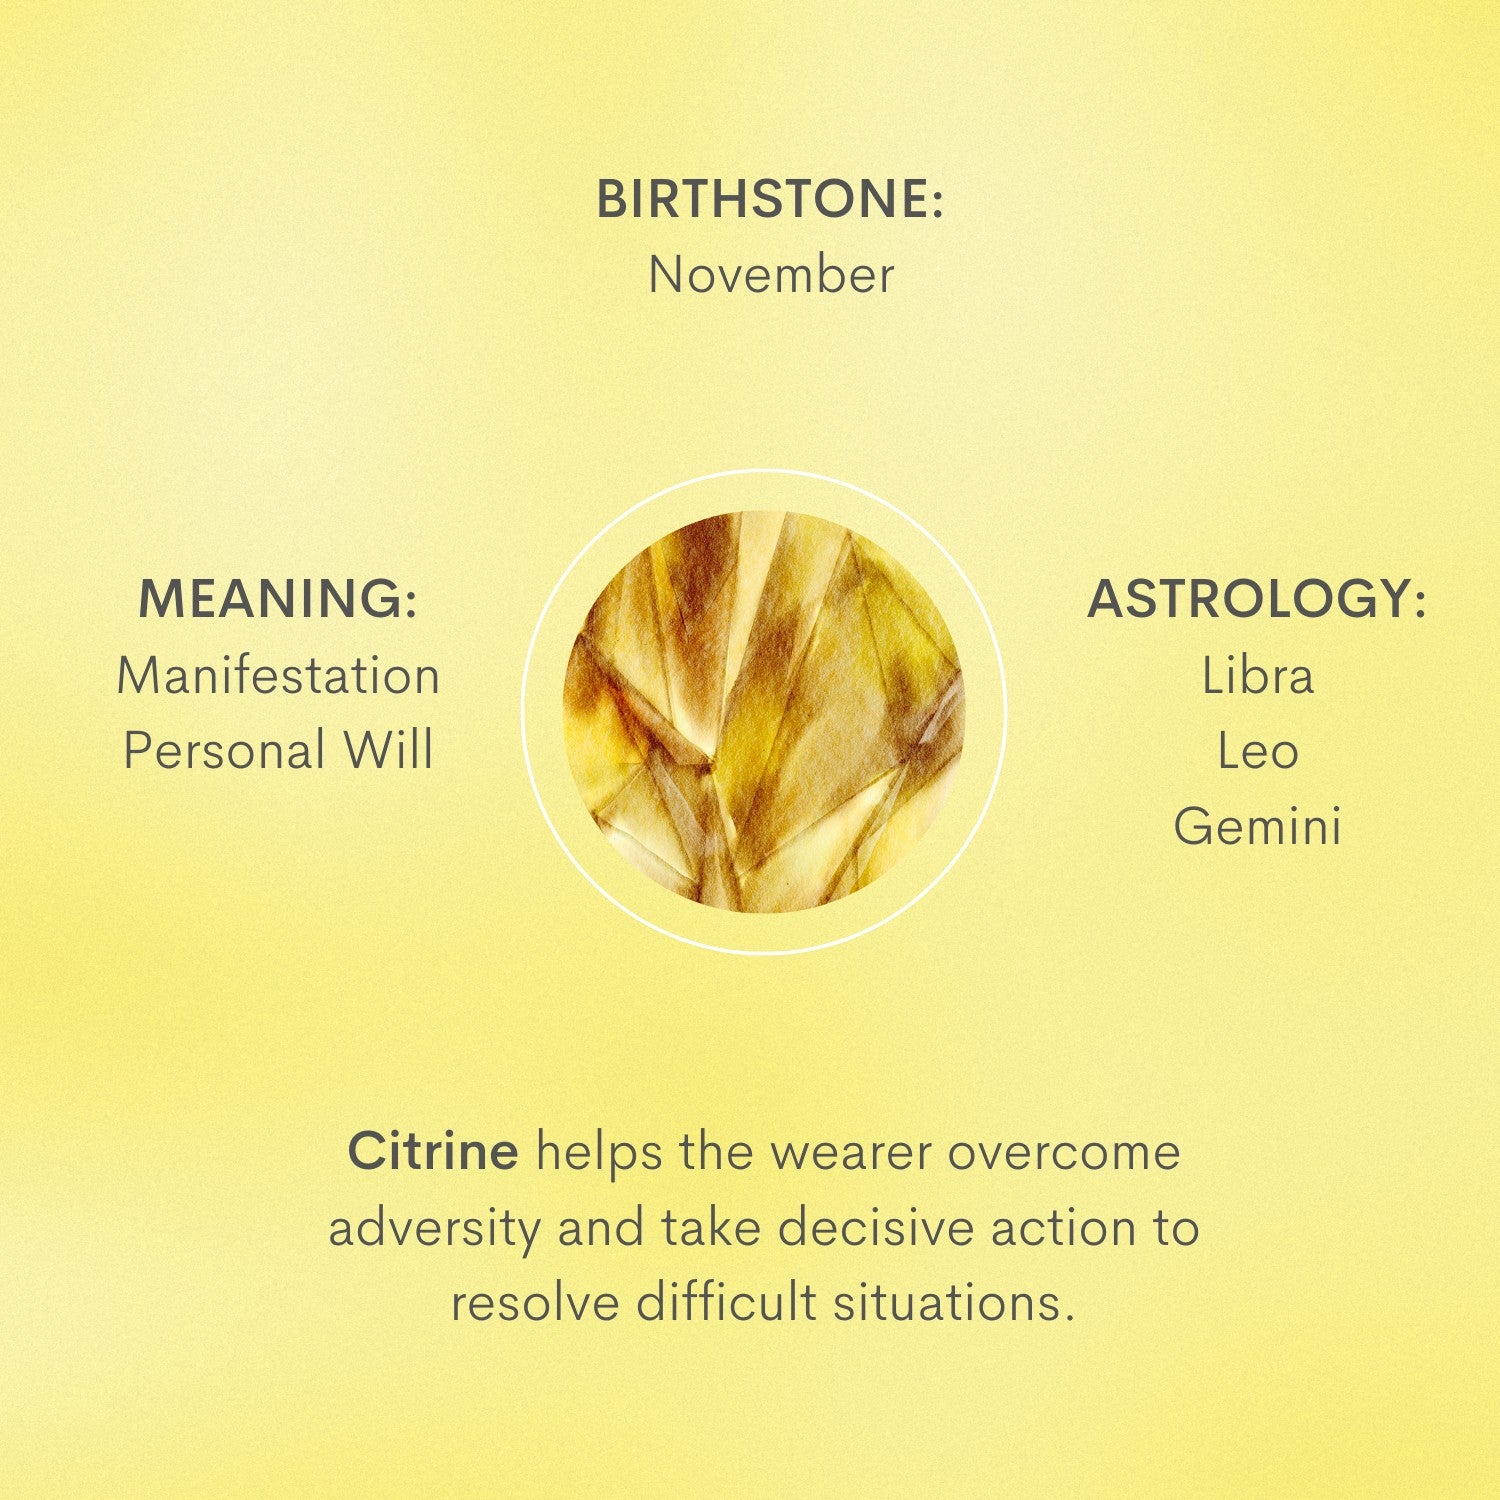 Citrine helps the wearer overcome adversity and take decisive action to resolve difficult situations.